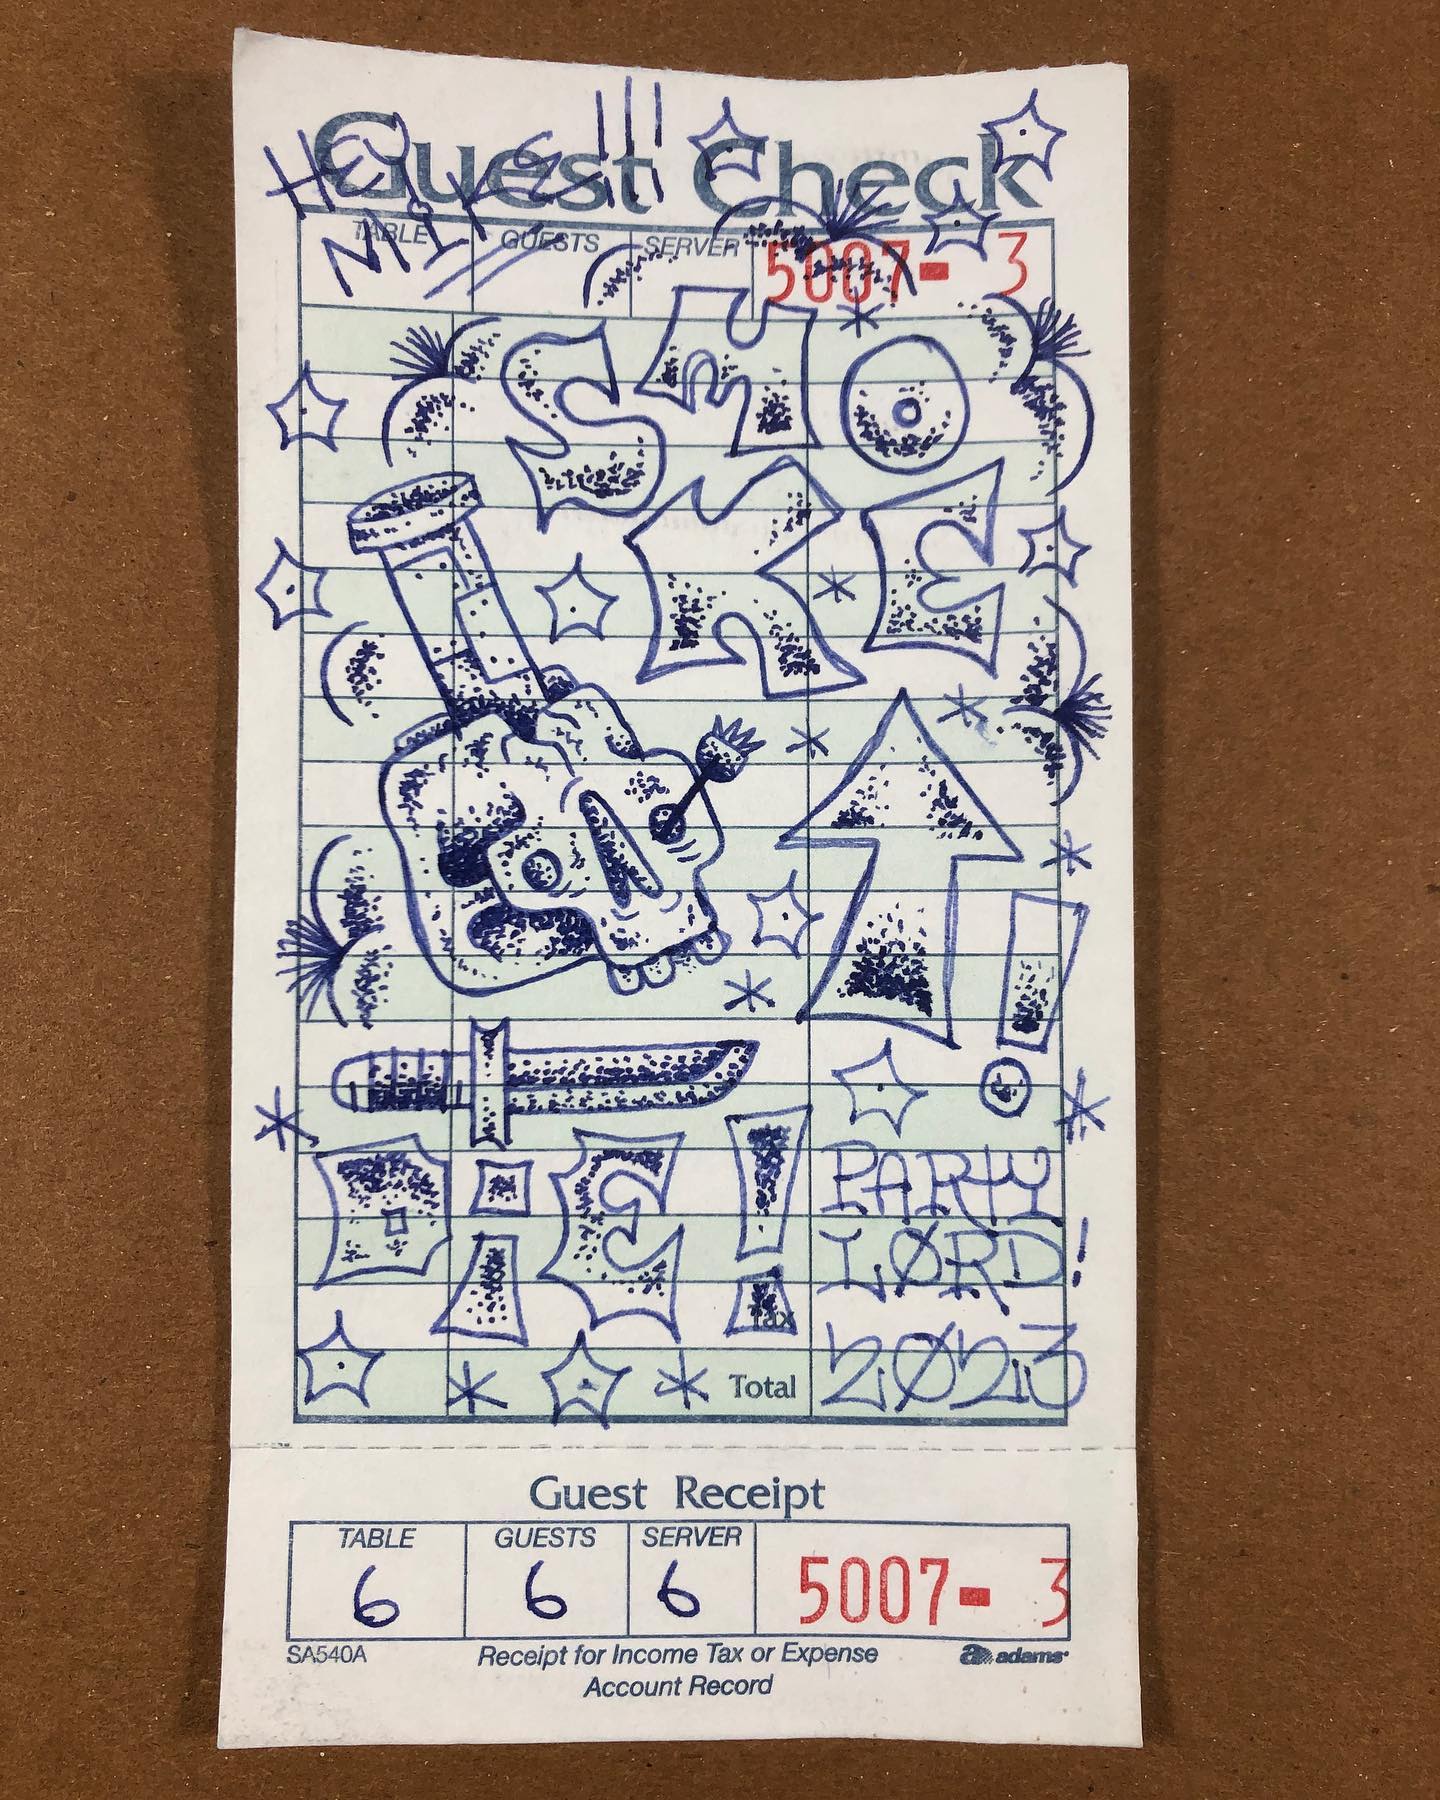 Blue ink on restaurant bill, or 'Guest Check' with a skull bong, knife, and 'Smoke Up and Die!' text